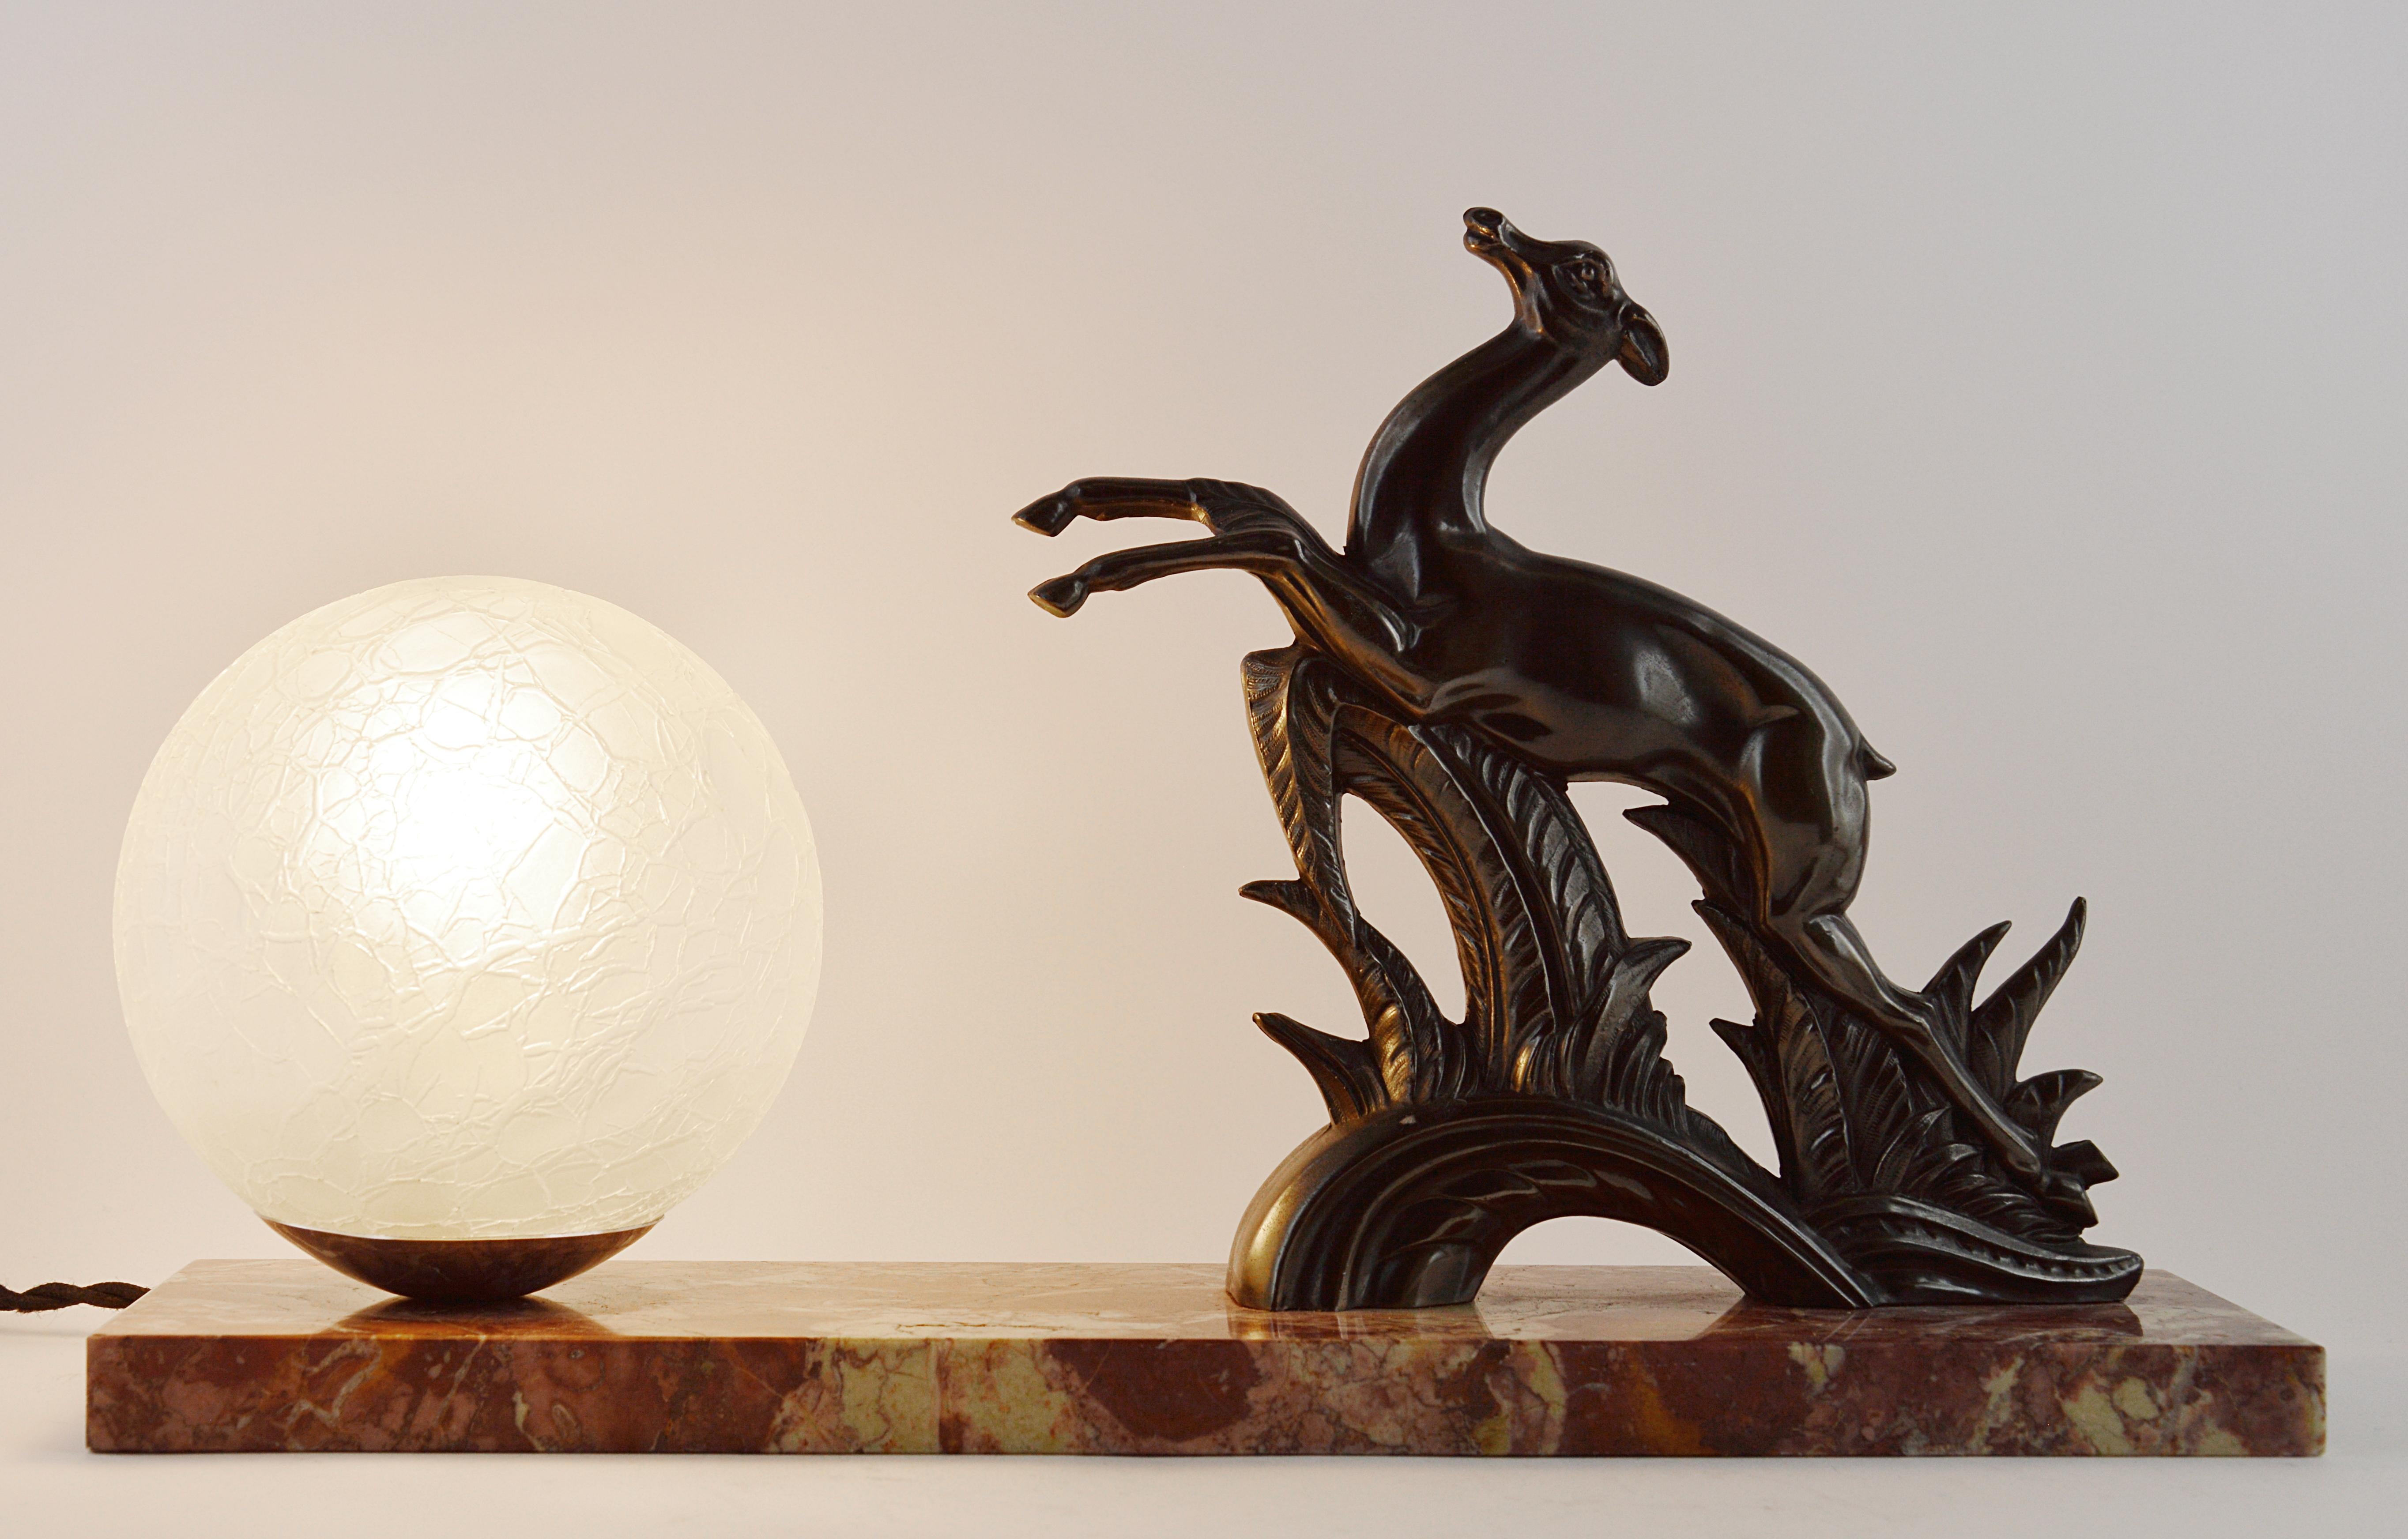 French Art Deco antelope table lamp, 1930s. Spelter antelope with its fishnet ball lampshade on its marble base. Original bronze patina. Delivered wired for your country (US, EU, Australia, etc.).